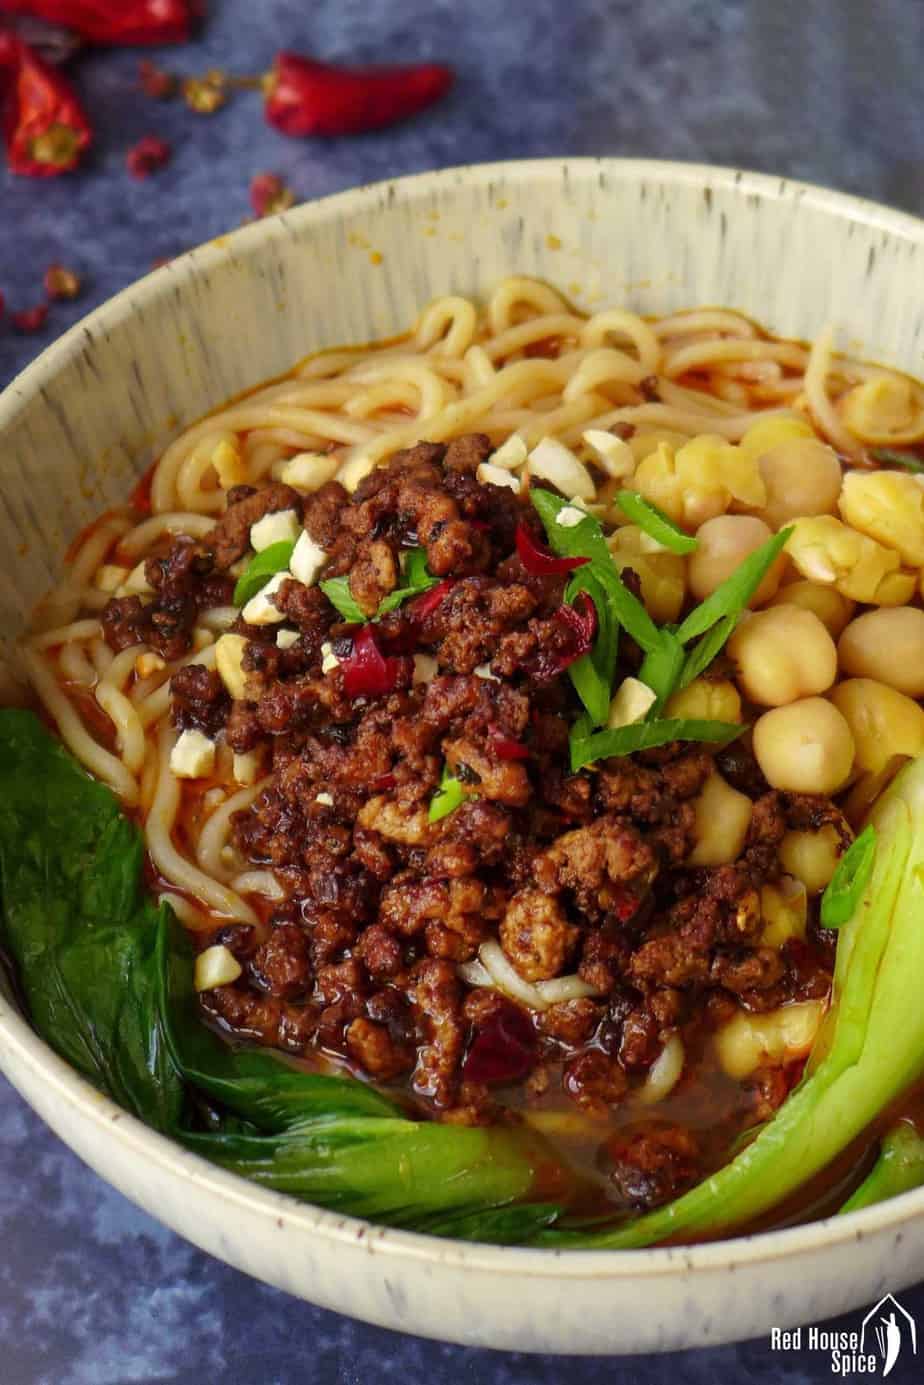 A bowl of Chongqing noodles topped with minced meat and chickpeas.